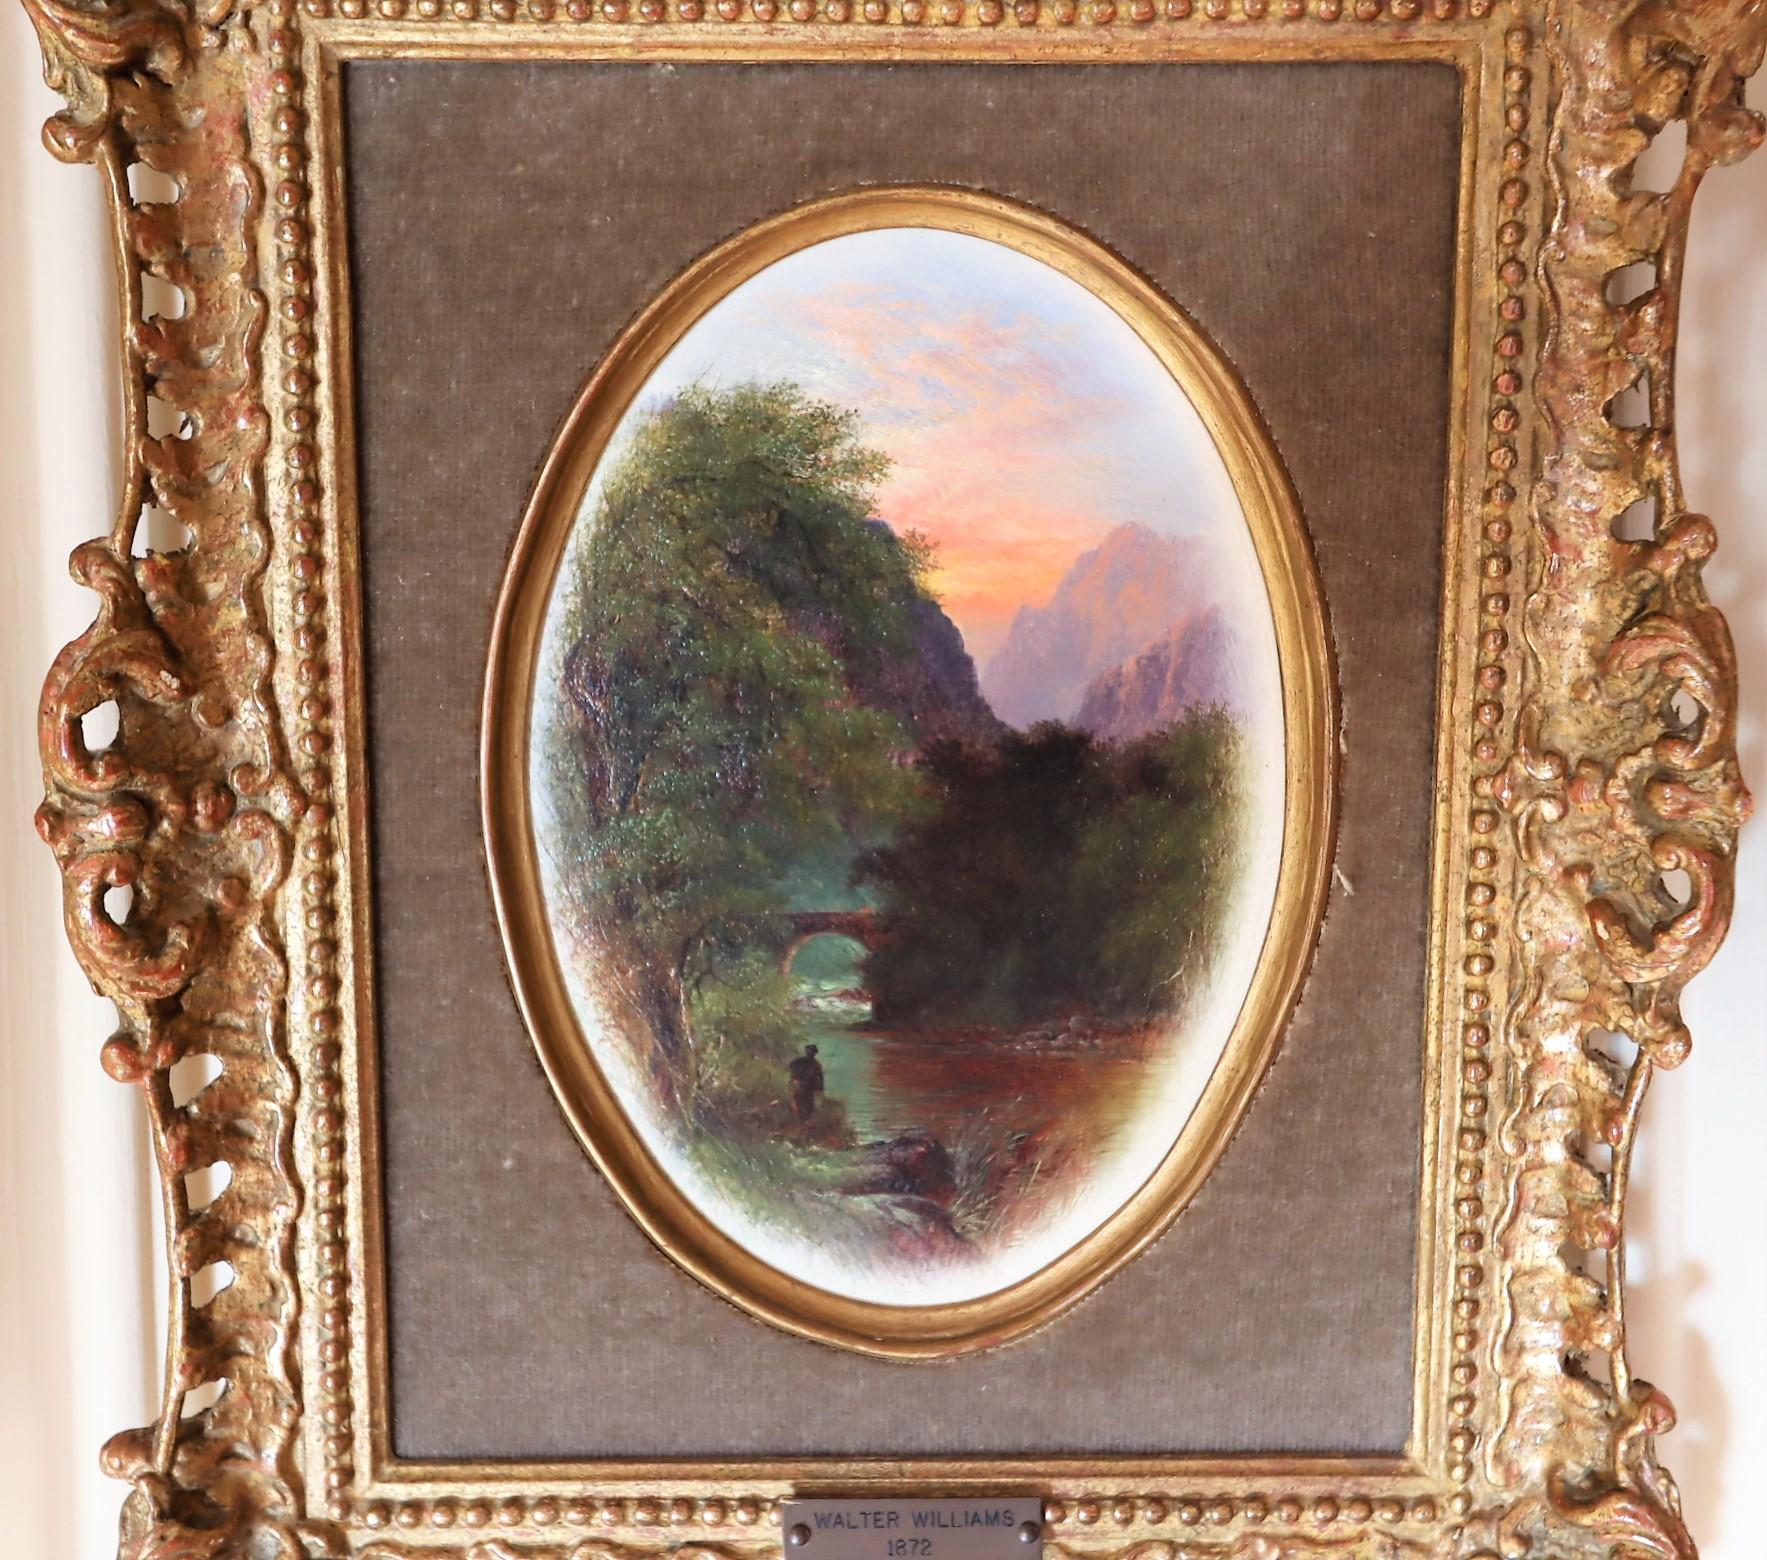 Pair of Walter Williams Ovals
Oil on Canvas
River scene 1872 & Mountains 1872
Both are 4 1/2 x 6 1/2 inches Canvas
Both are 9 1/2 x 11 1/4 inches Framed